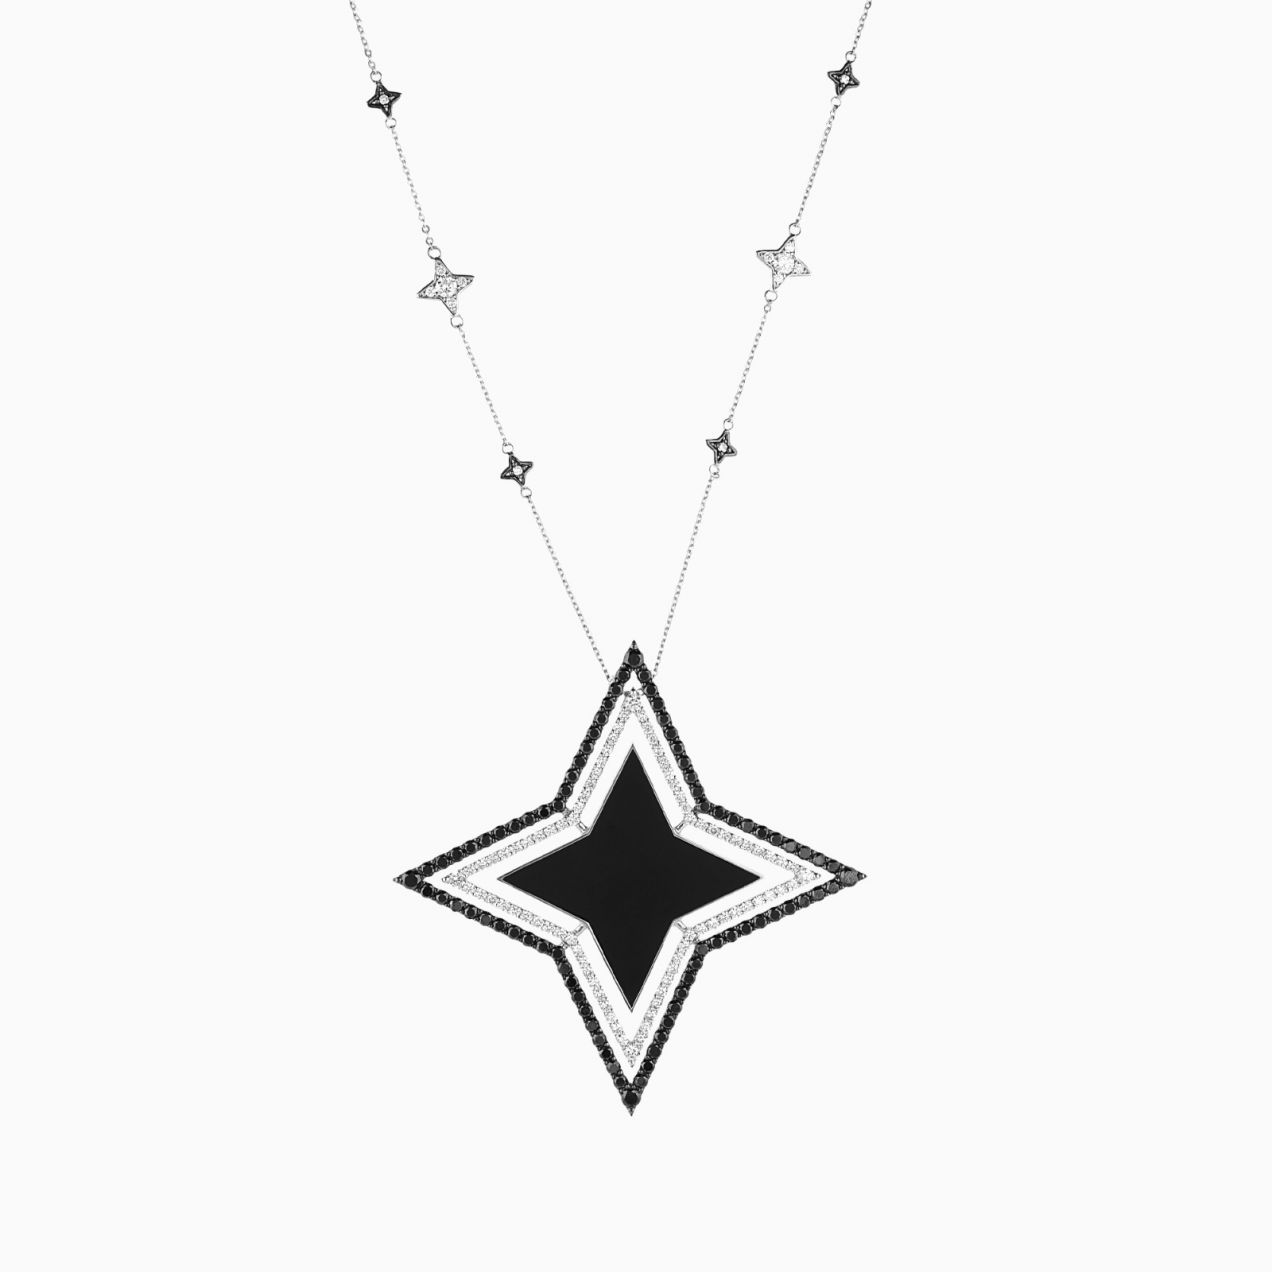 Star necklace in white gold and black rhodium gold with diamonds and black onyx